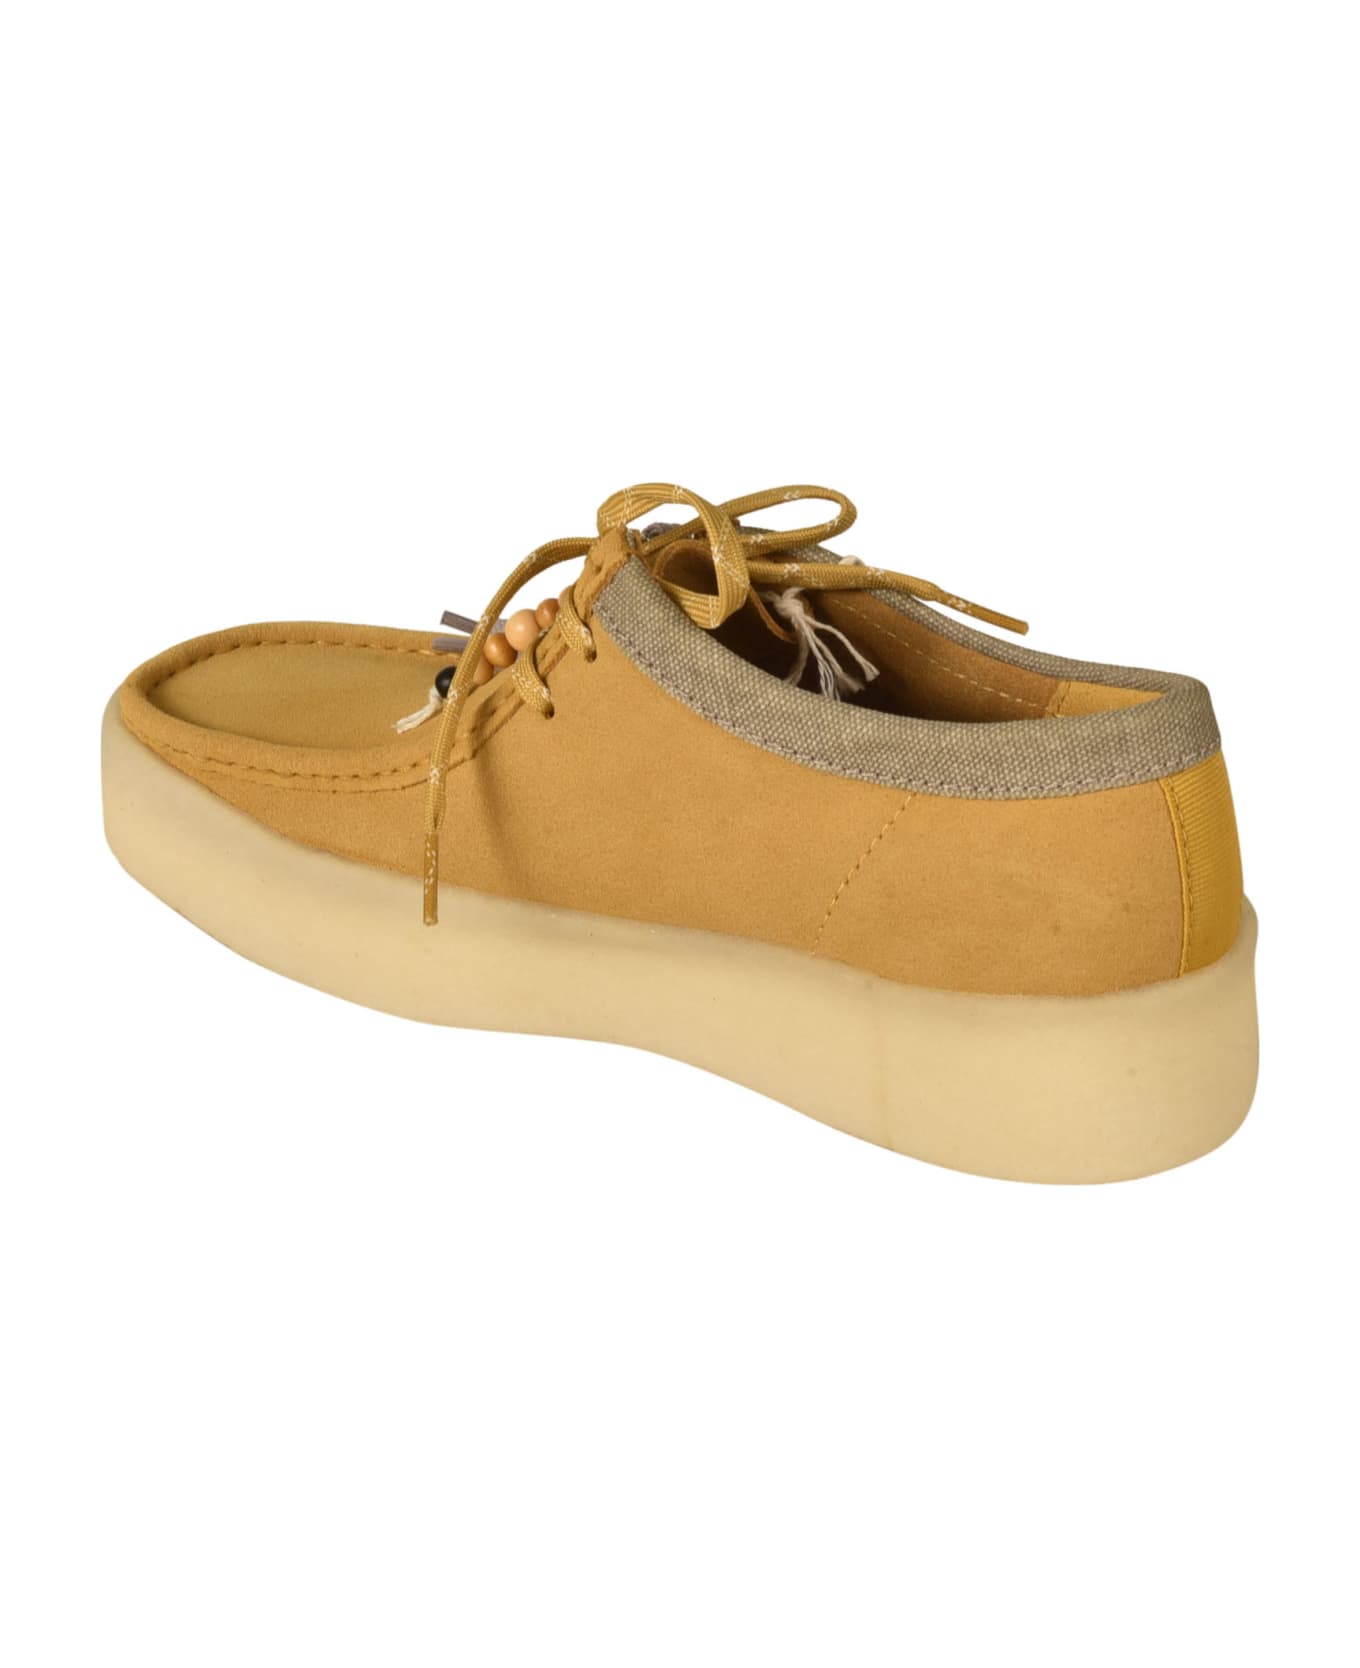 Clarks Wallabee Cup Ankle Boots - Amber